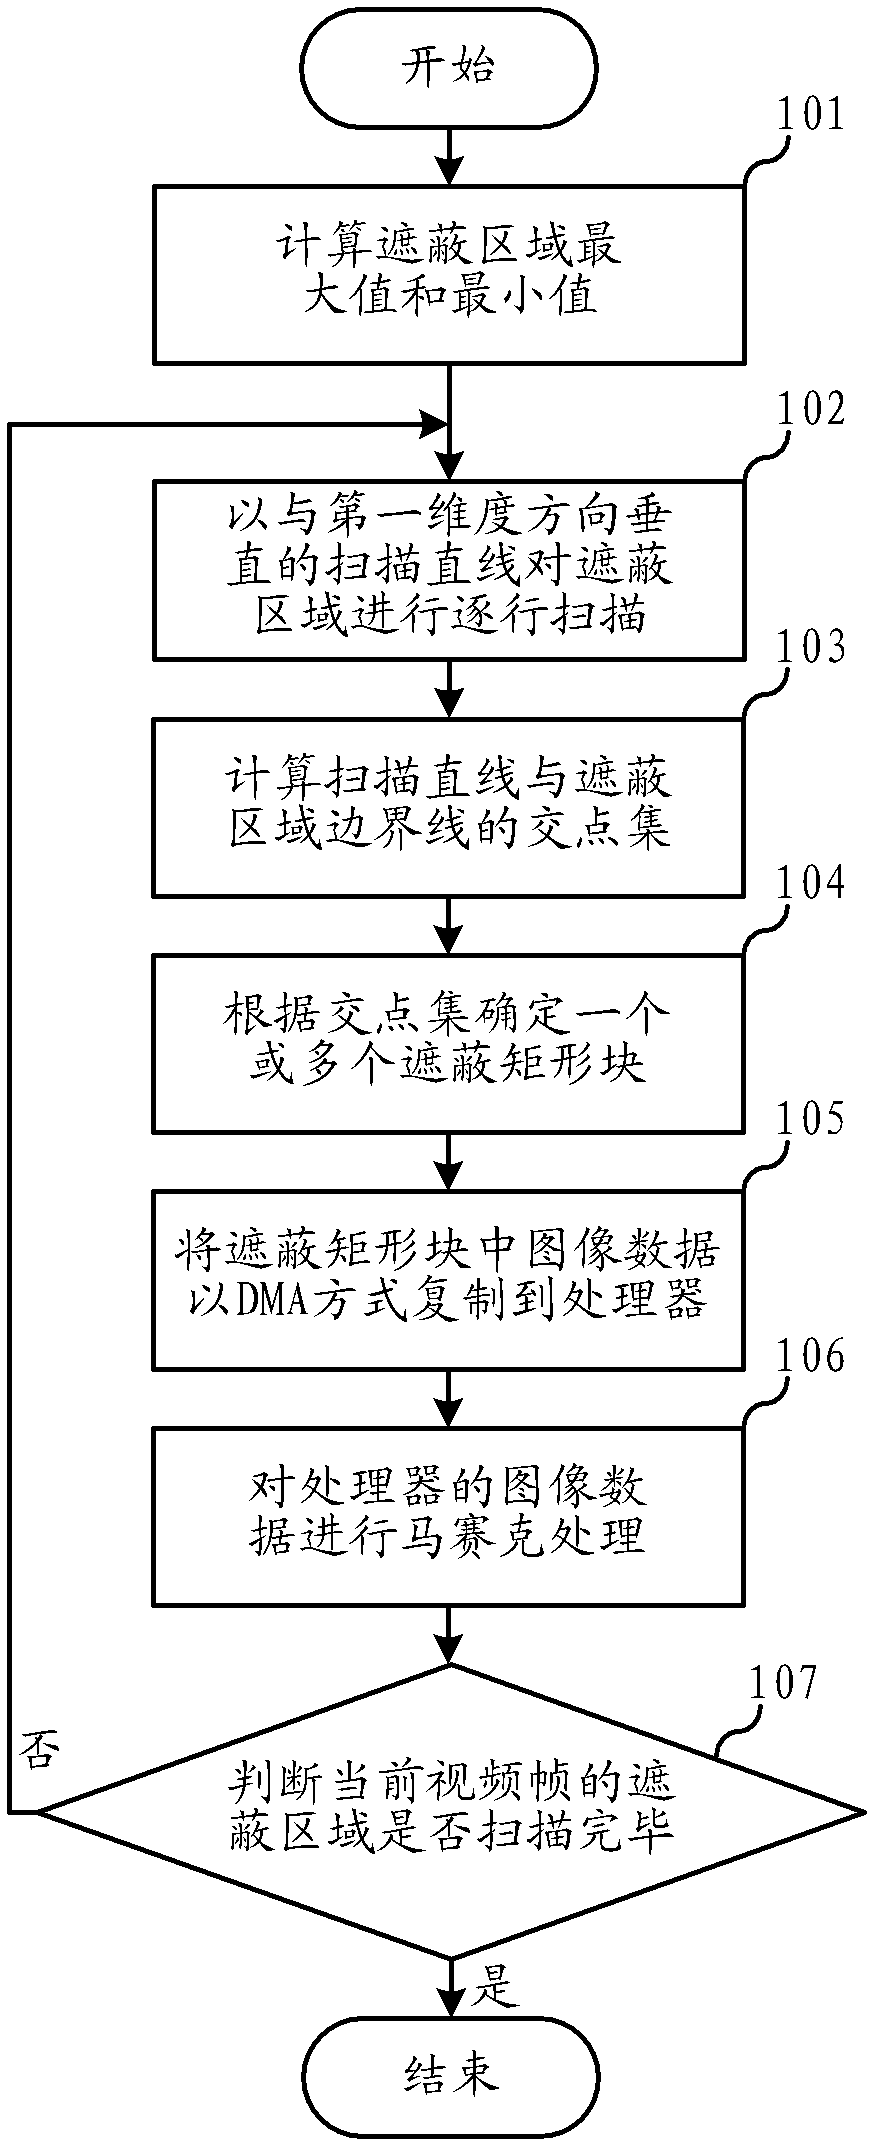 Method and device for performing irregular polygon mosaic processing on monitored image